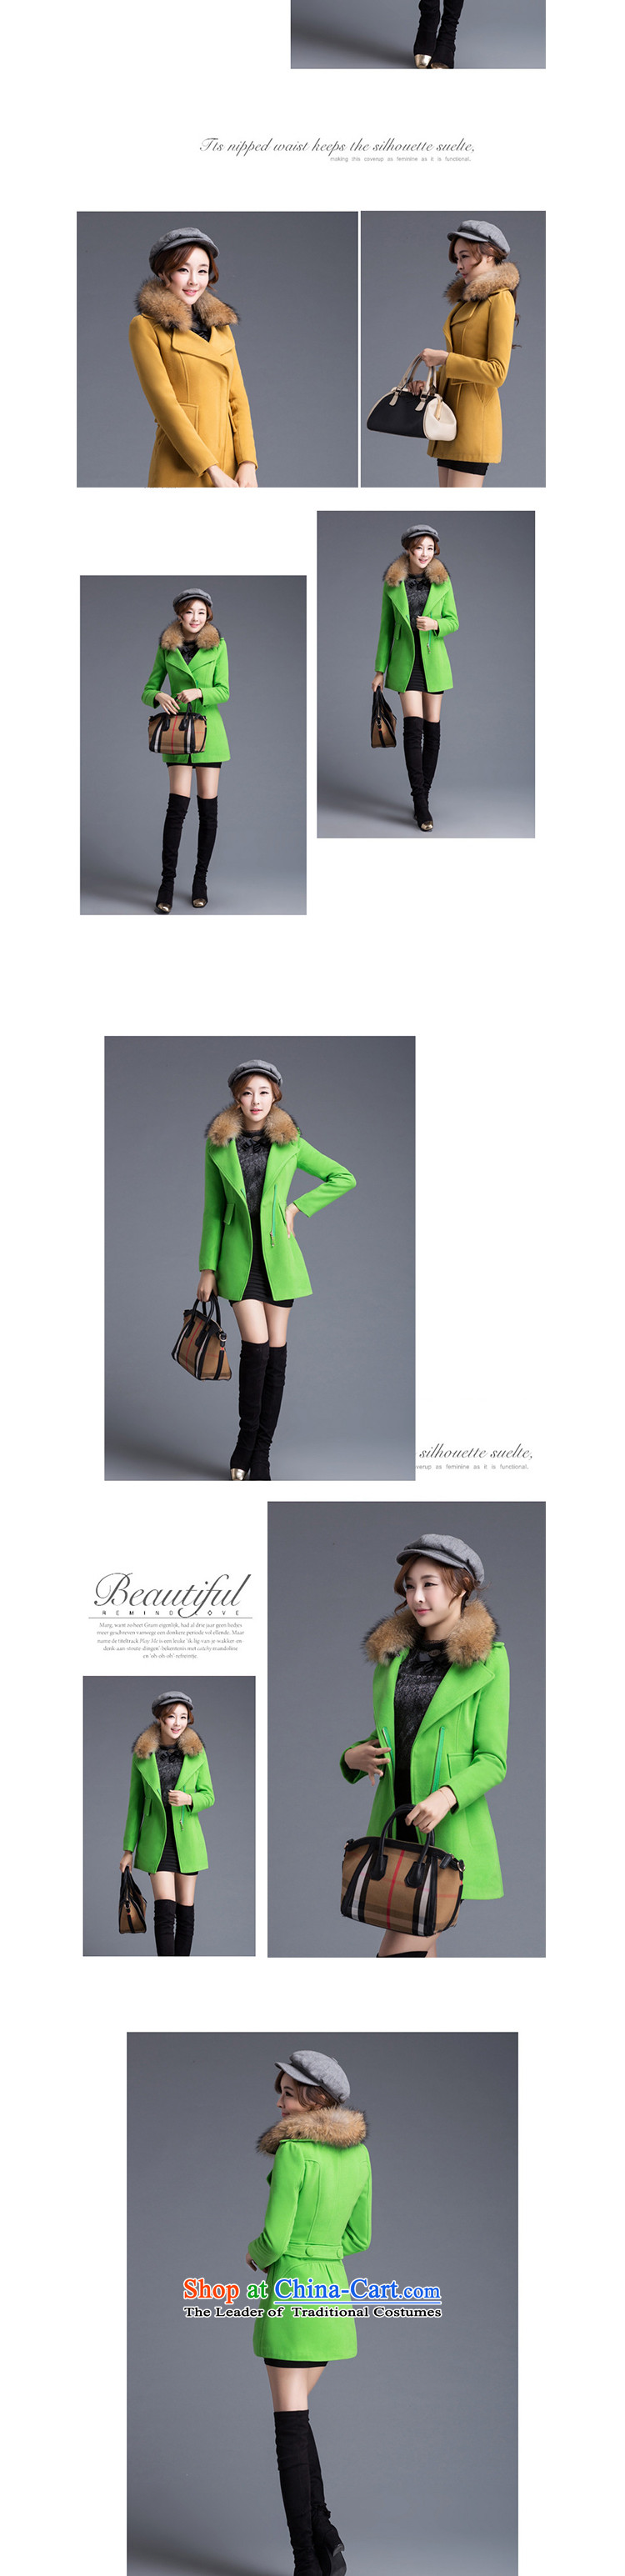 Printed poems? 2015 autumn and winter coats female new Korean? 